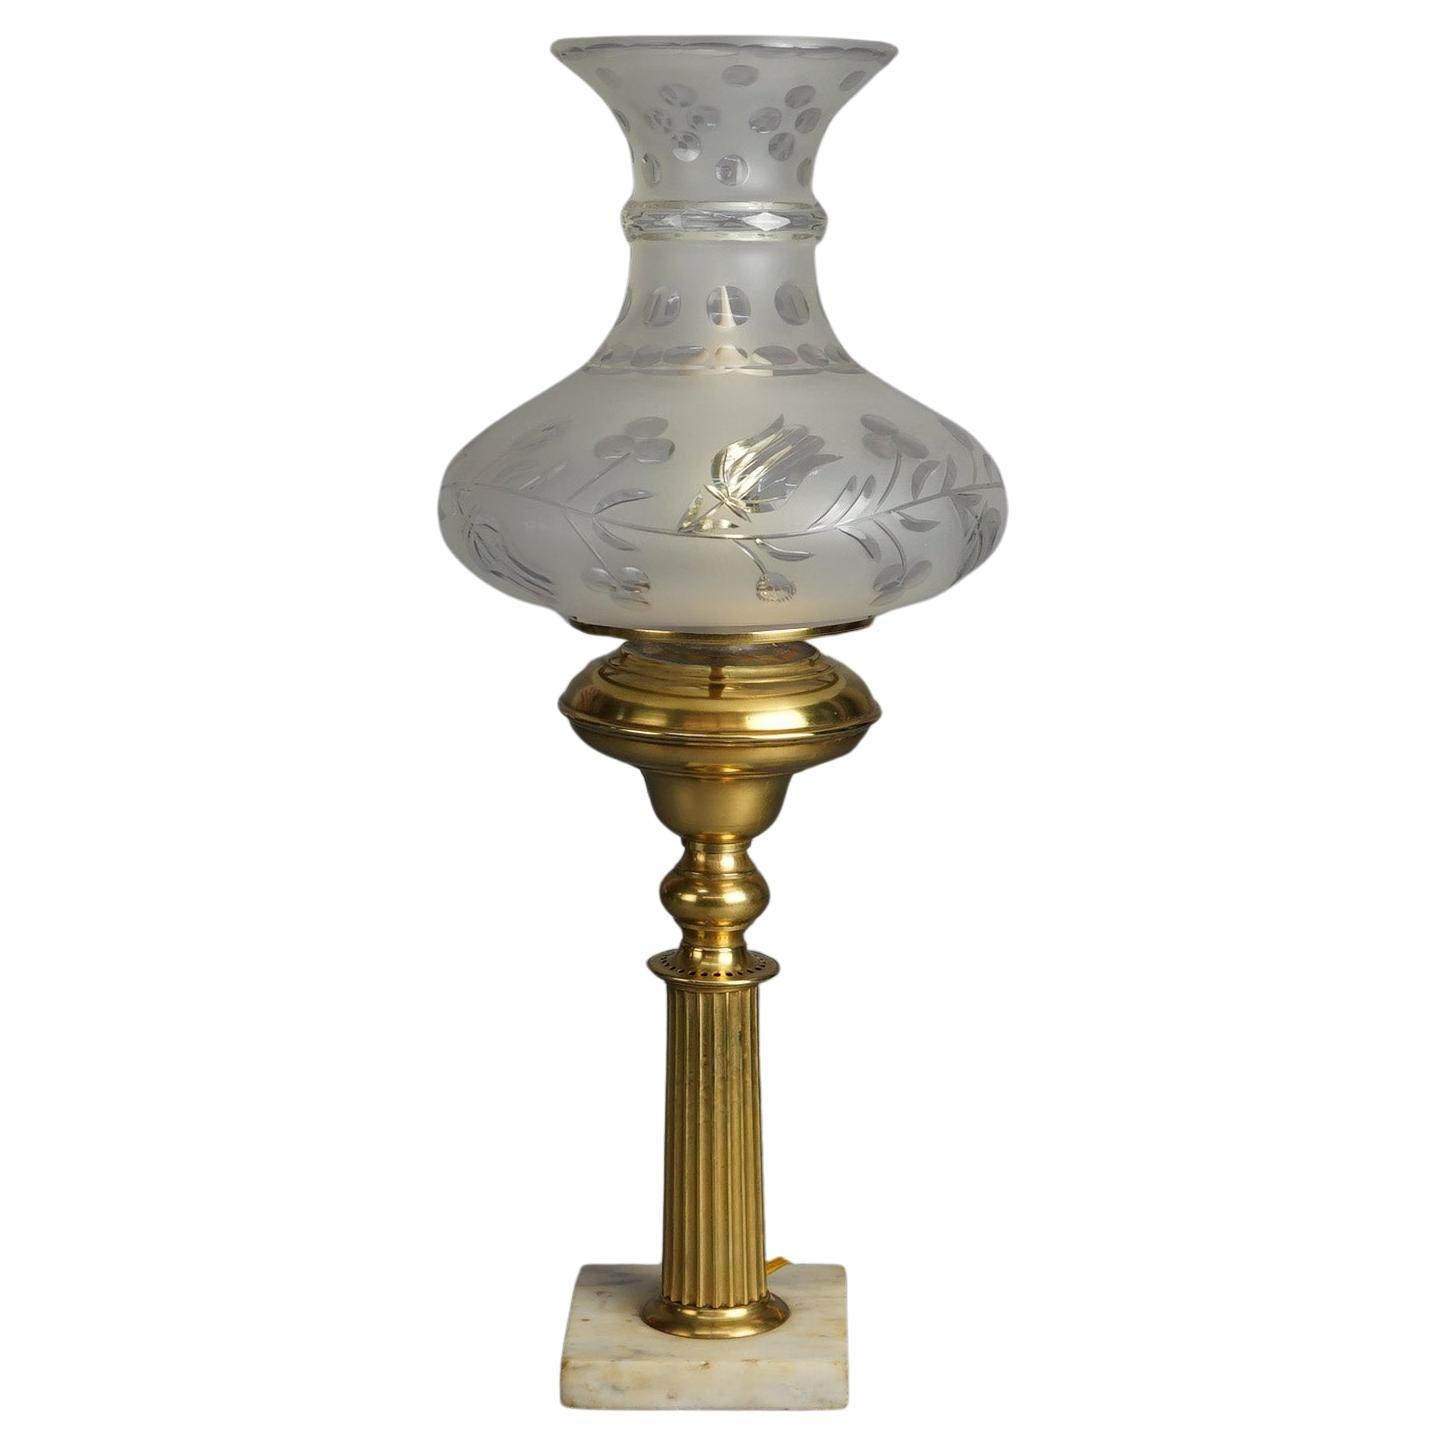 Antique Brass Solar Lamp with Tam-O-Shanter Cut Glass Shade & Marble Base C1840 For Sale